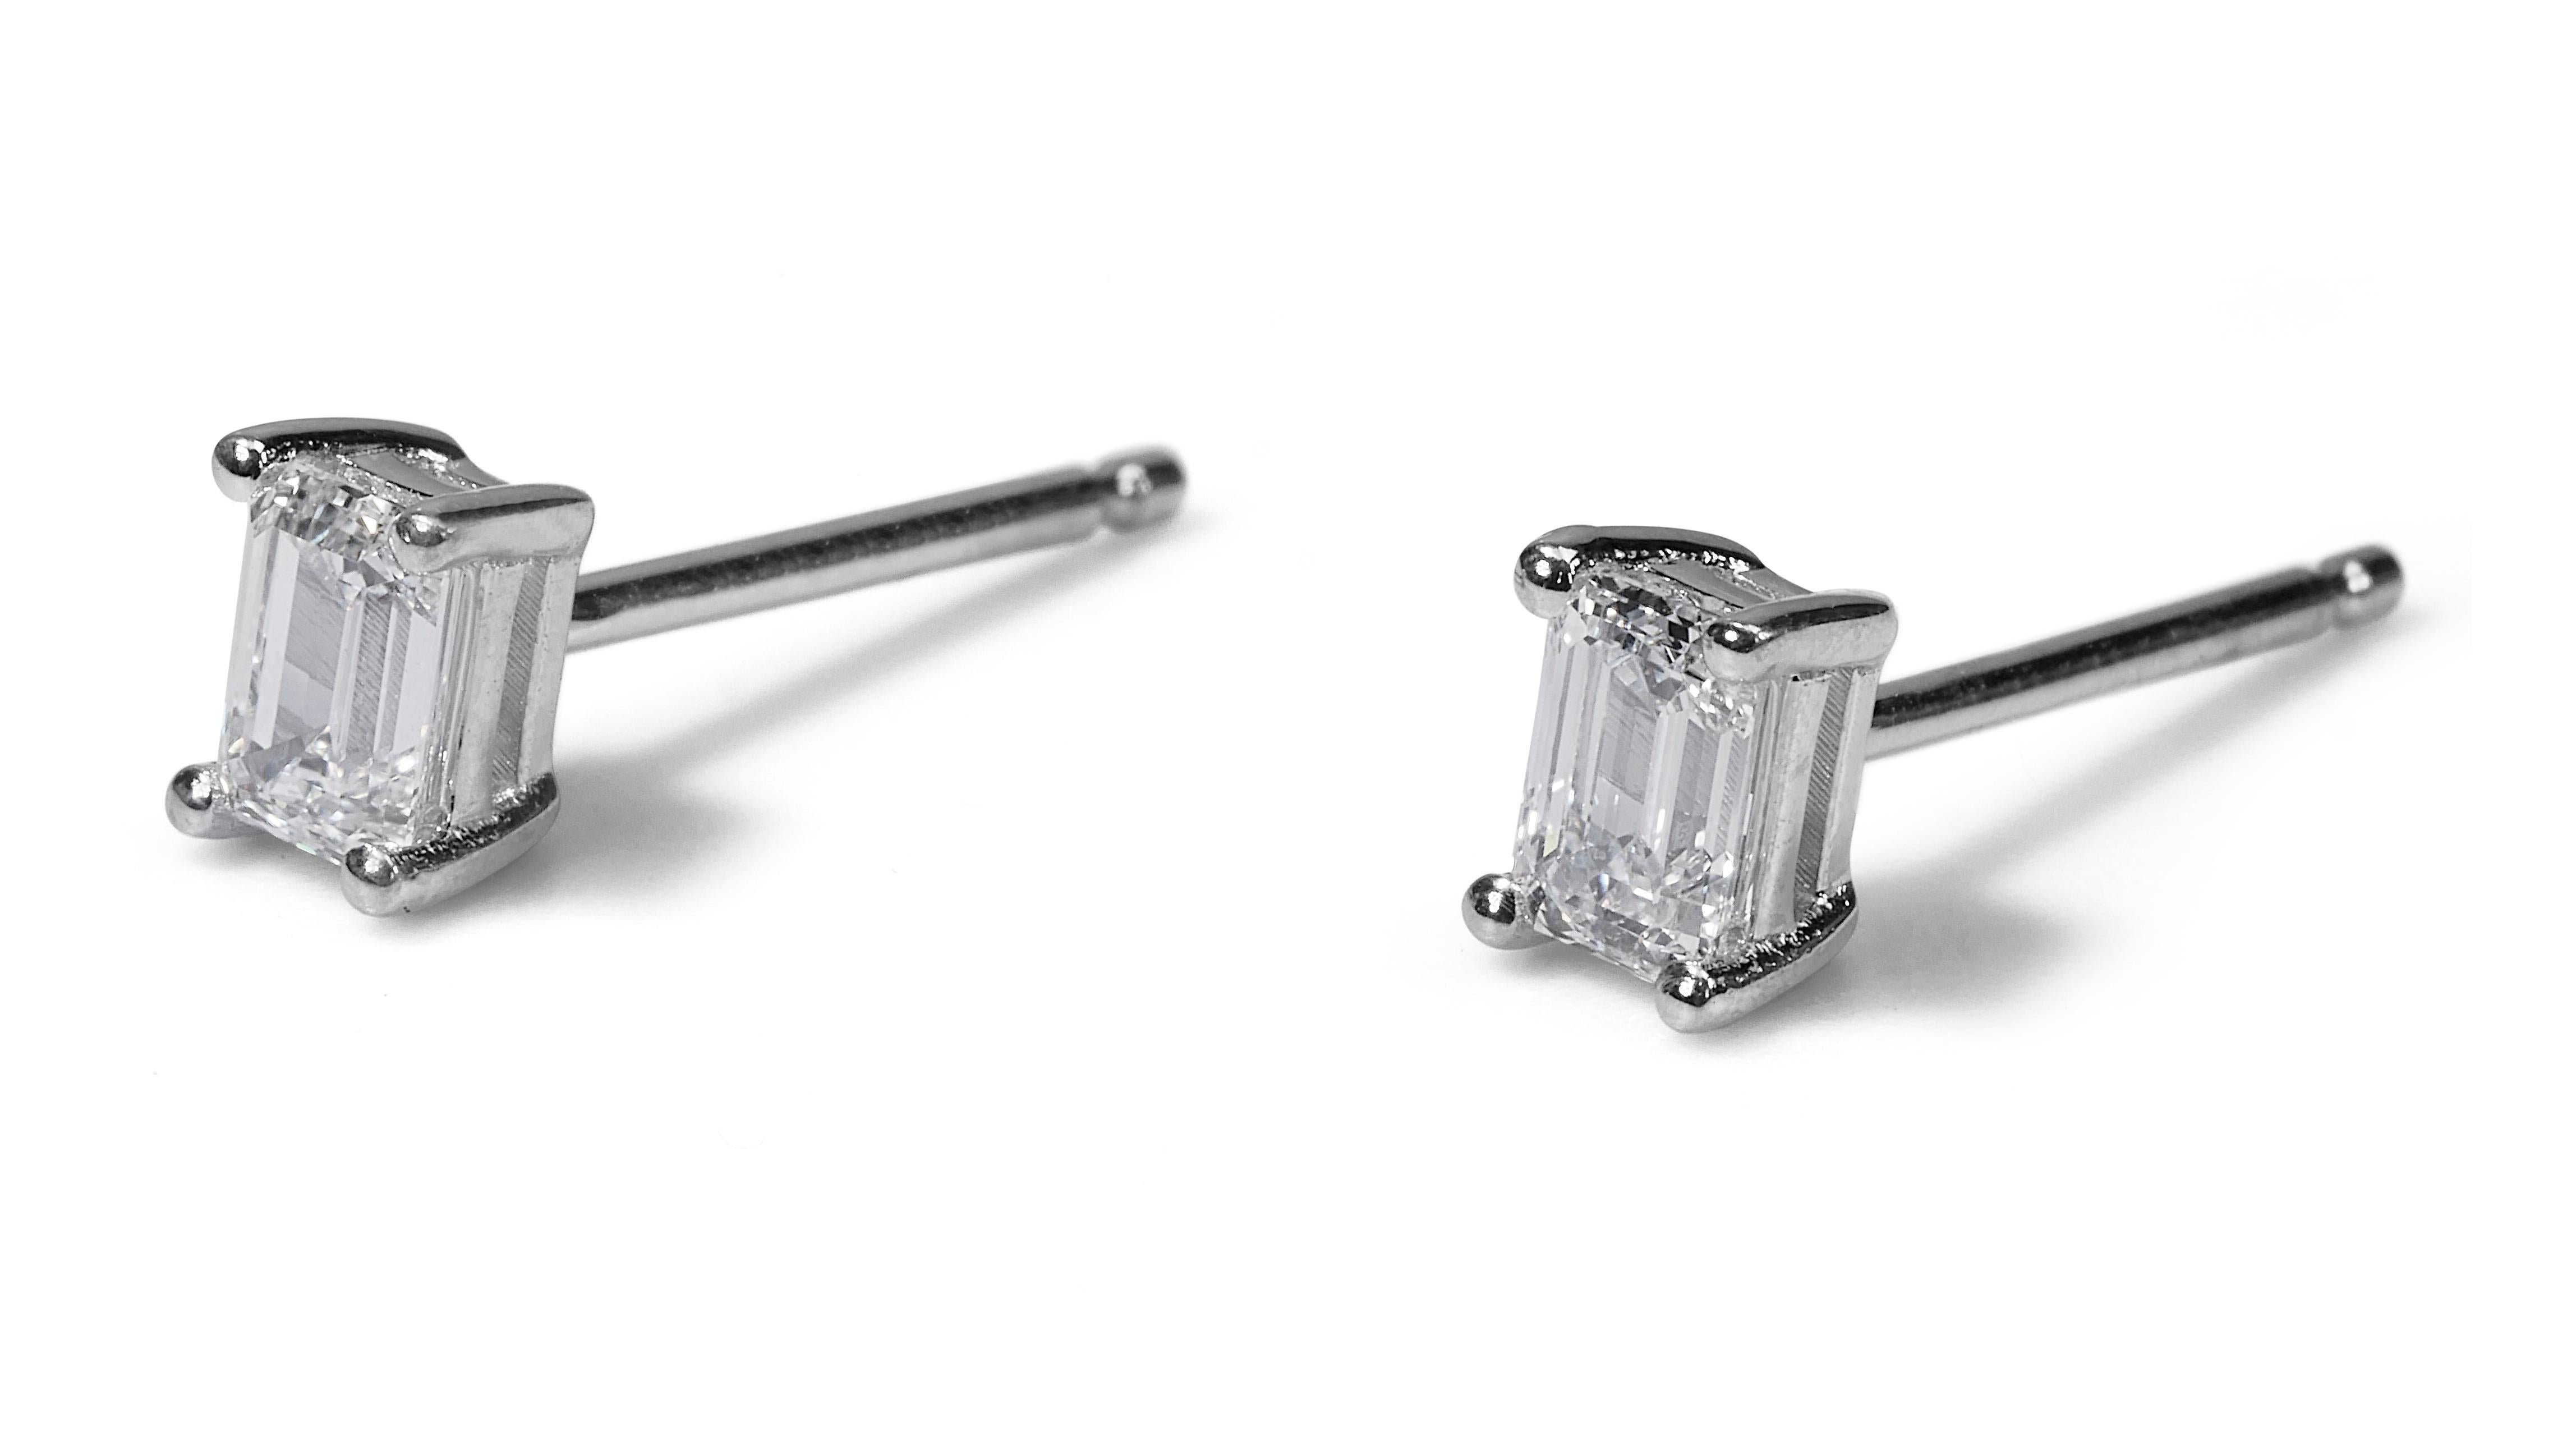 Timeless 2.02ct Diamond Stud Earrings in 18k White Gold - GIA Certified

Elevate your style with these exquisite diamond stud earrings, crafted in 18k white gold for a timeless and sophisticated look. The main stones feature two emerald-cut diamonds